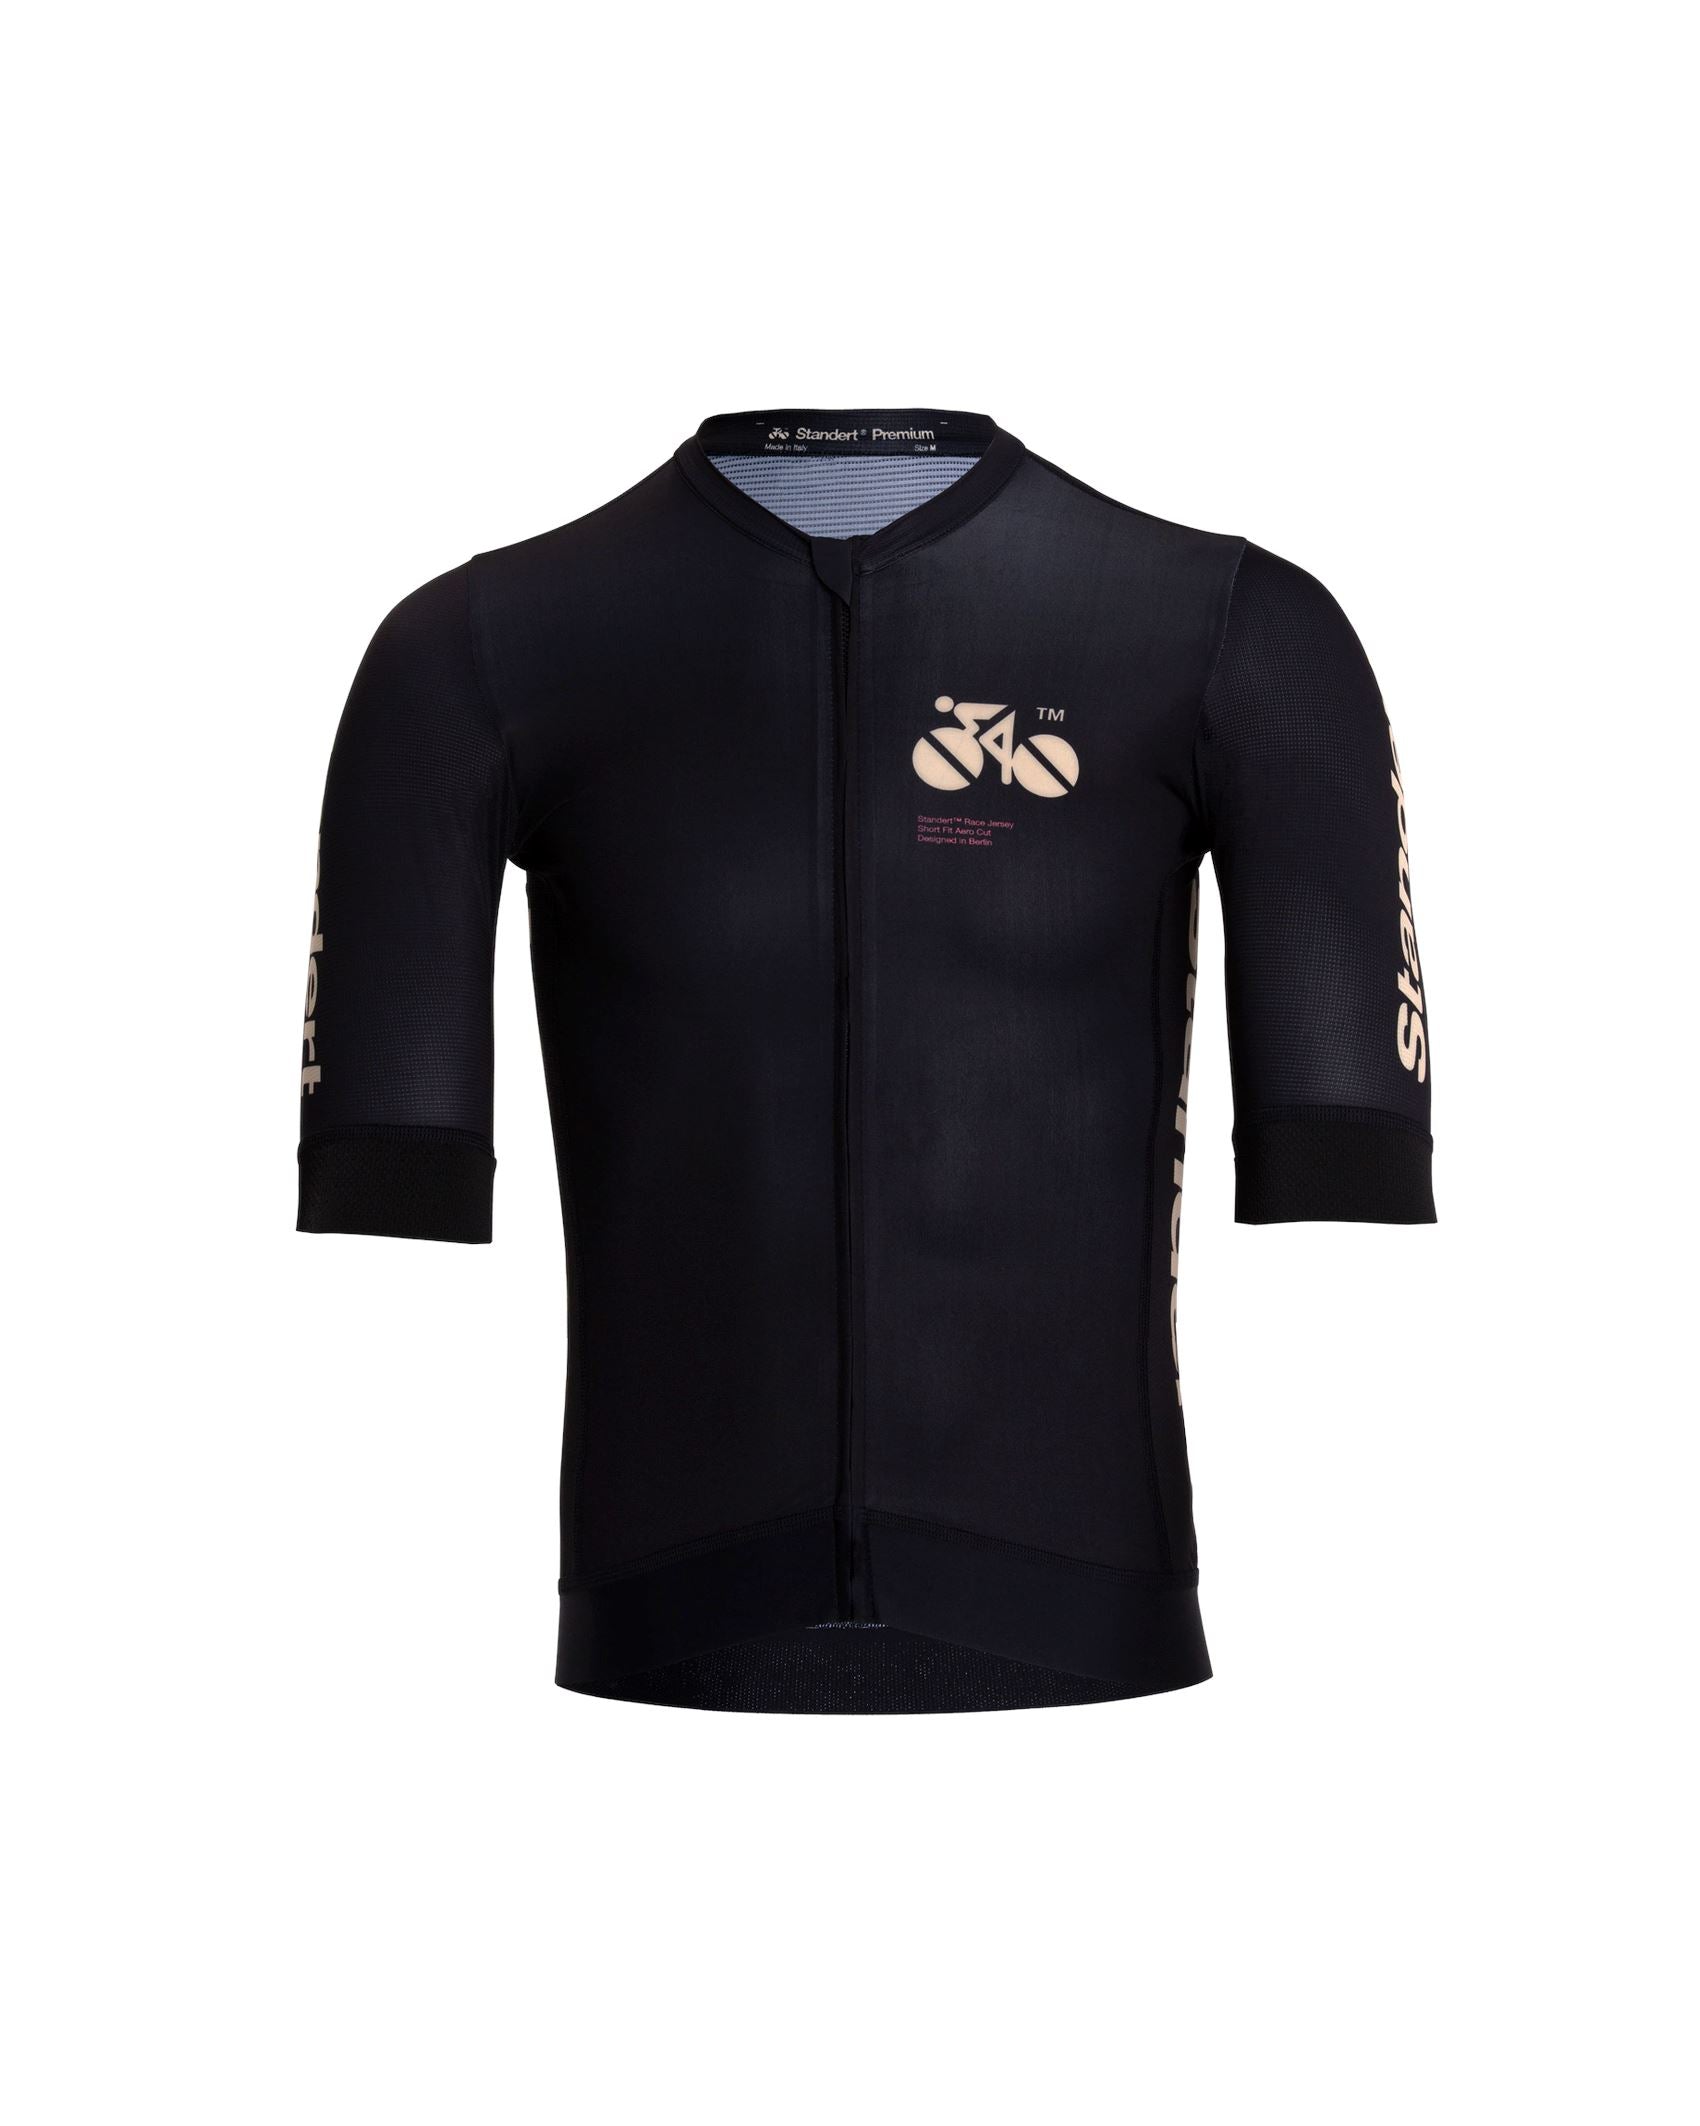 Standert - Maillot Premium RS Maillots Standert Analogue Edition XS 